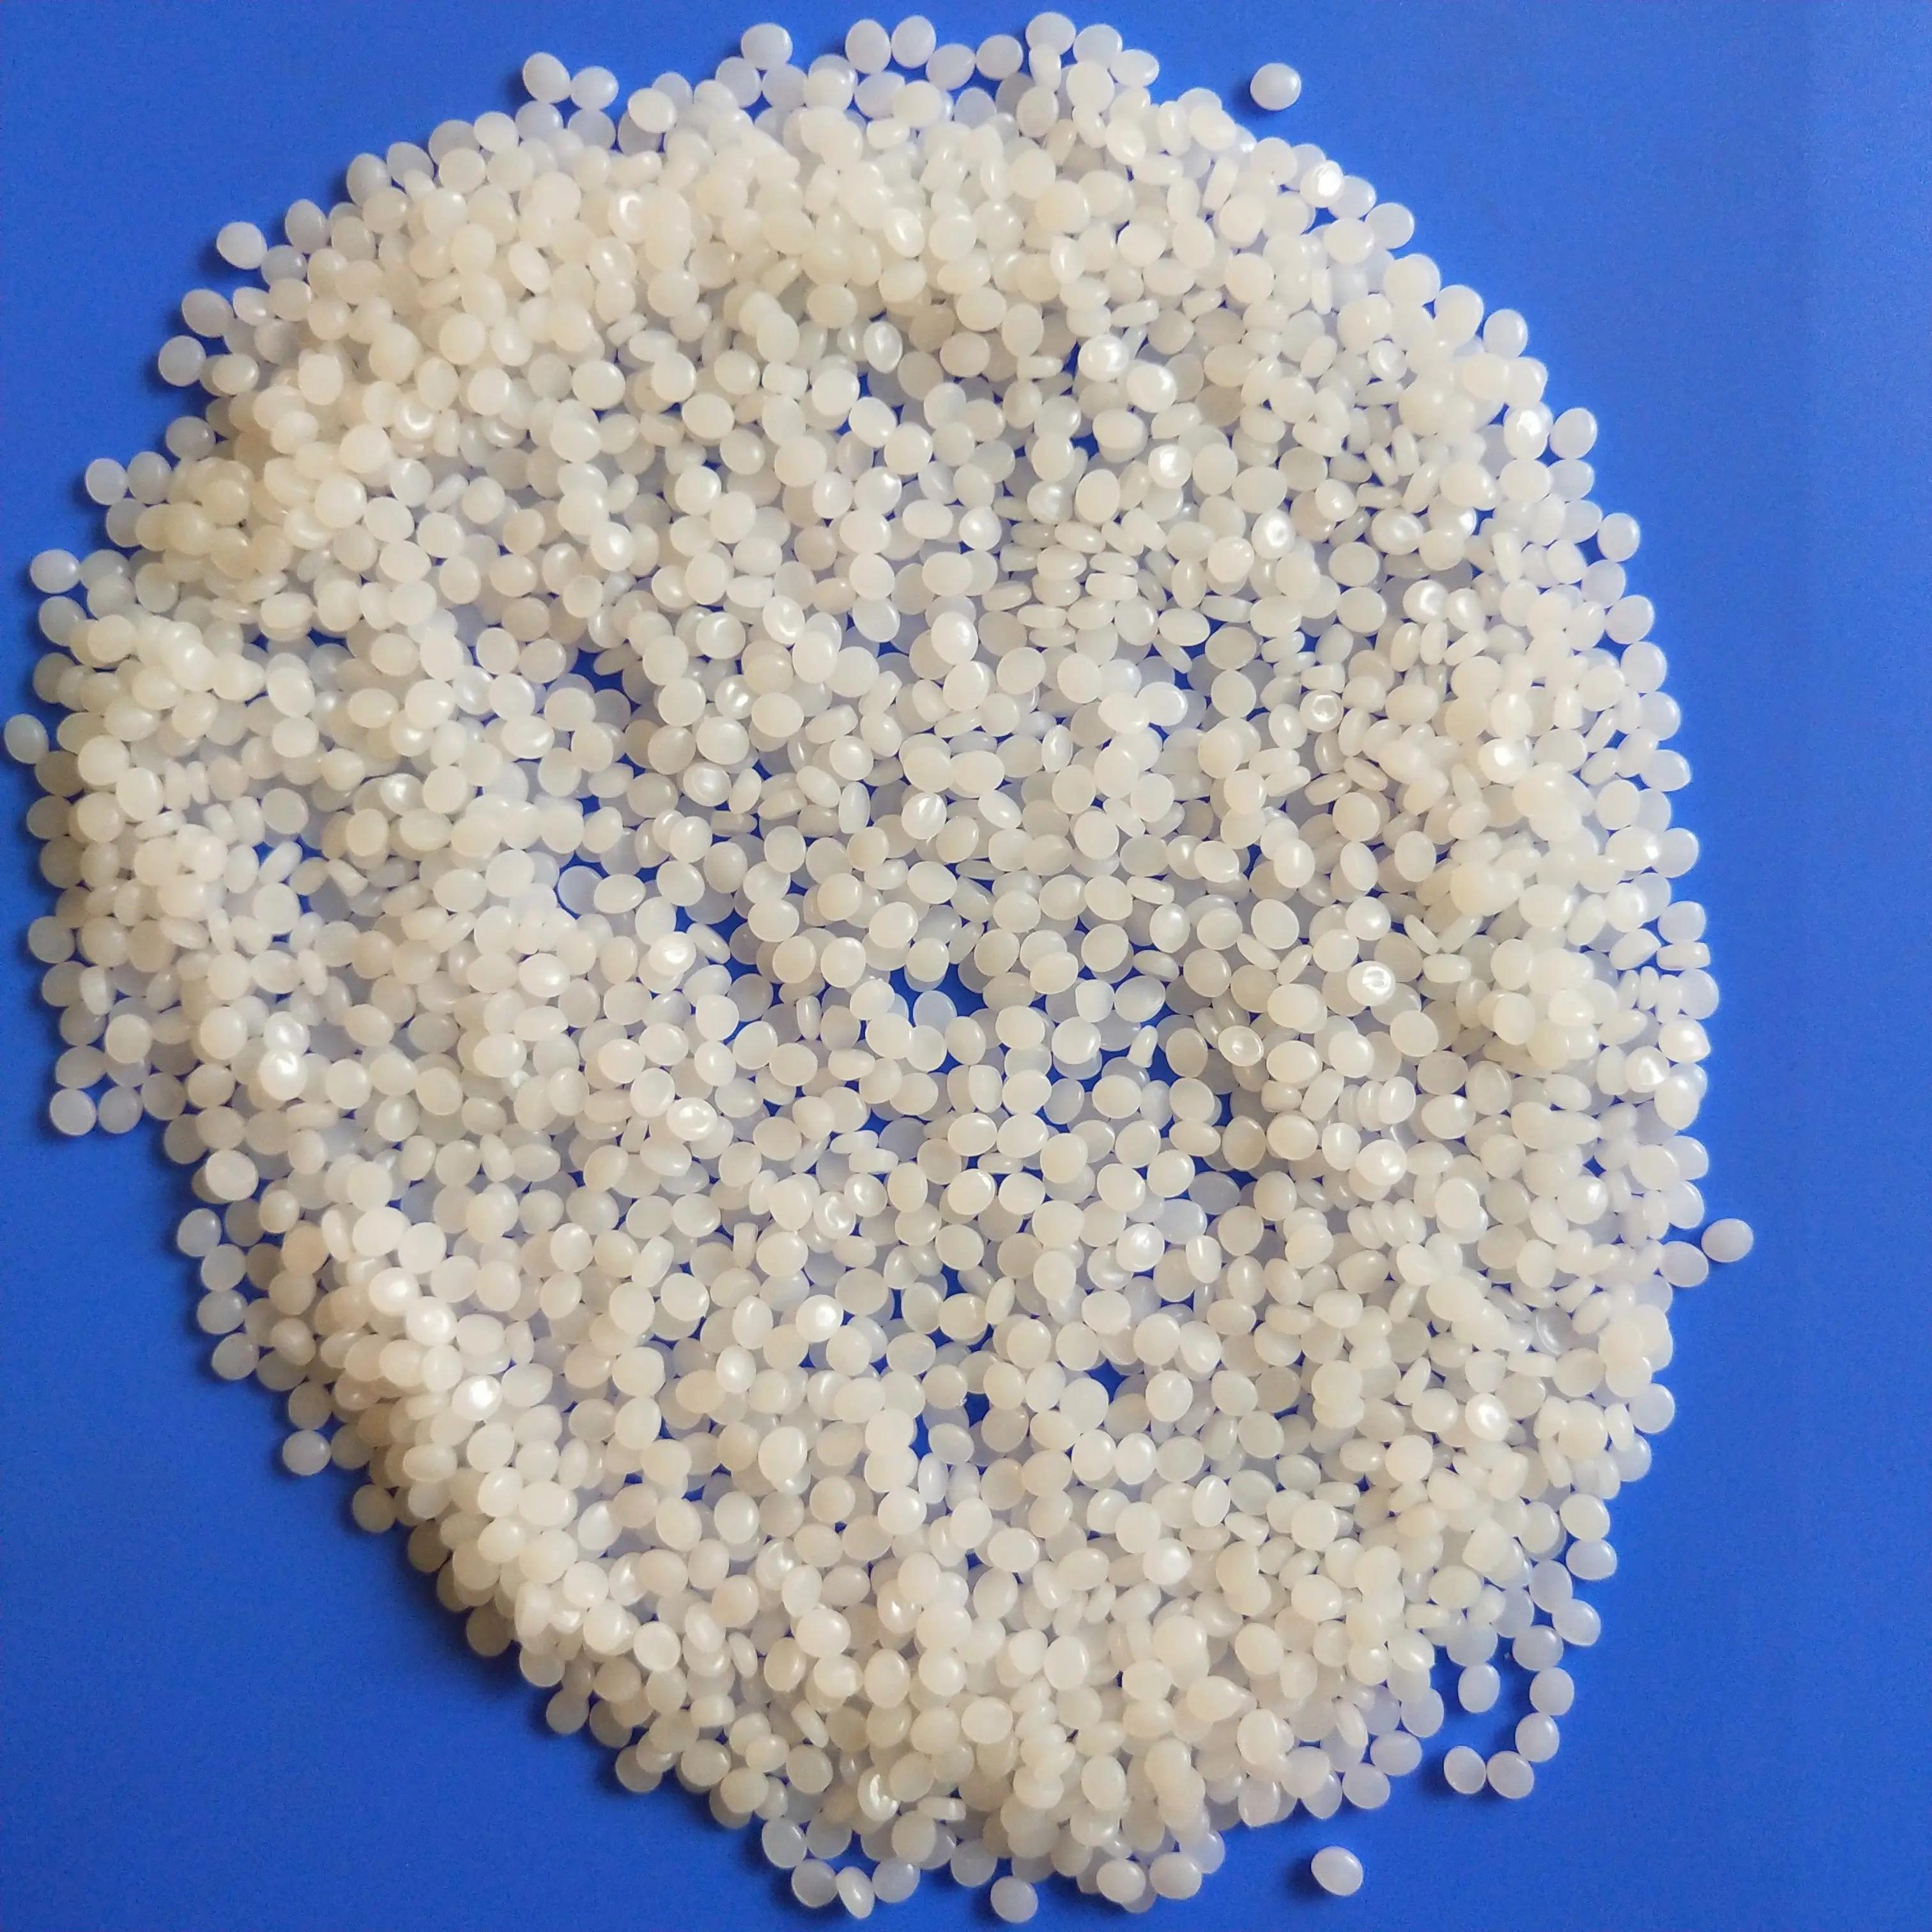 Virgin and Recycled HDPE / LDPE / PP / HM / LLDPE Granules